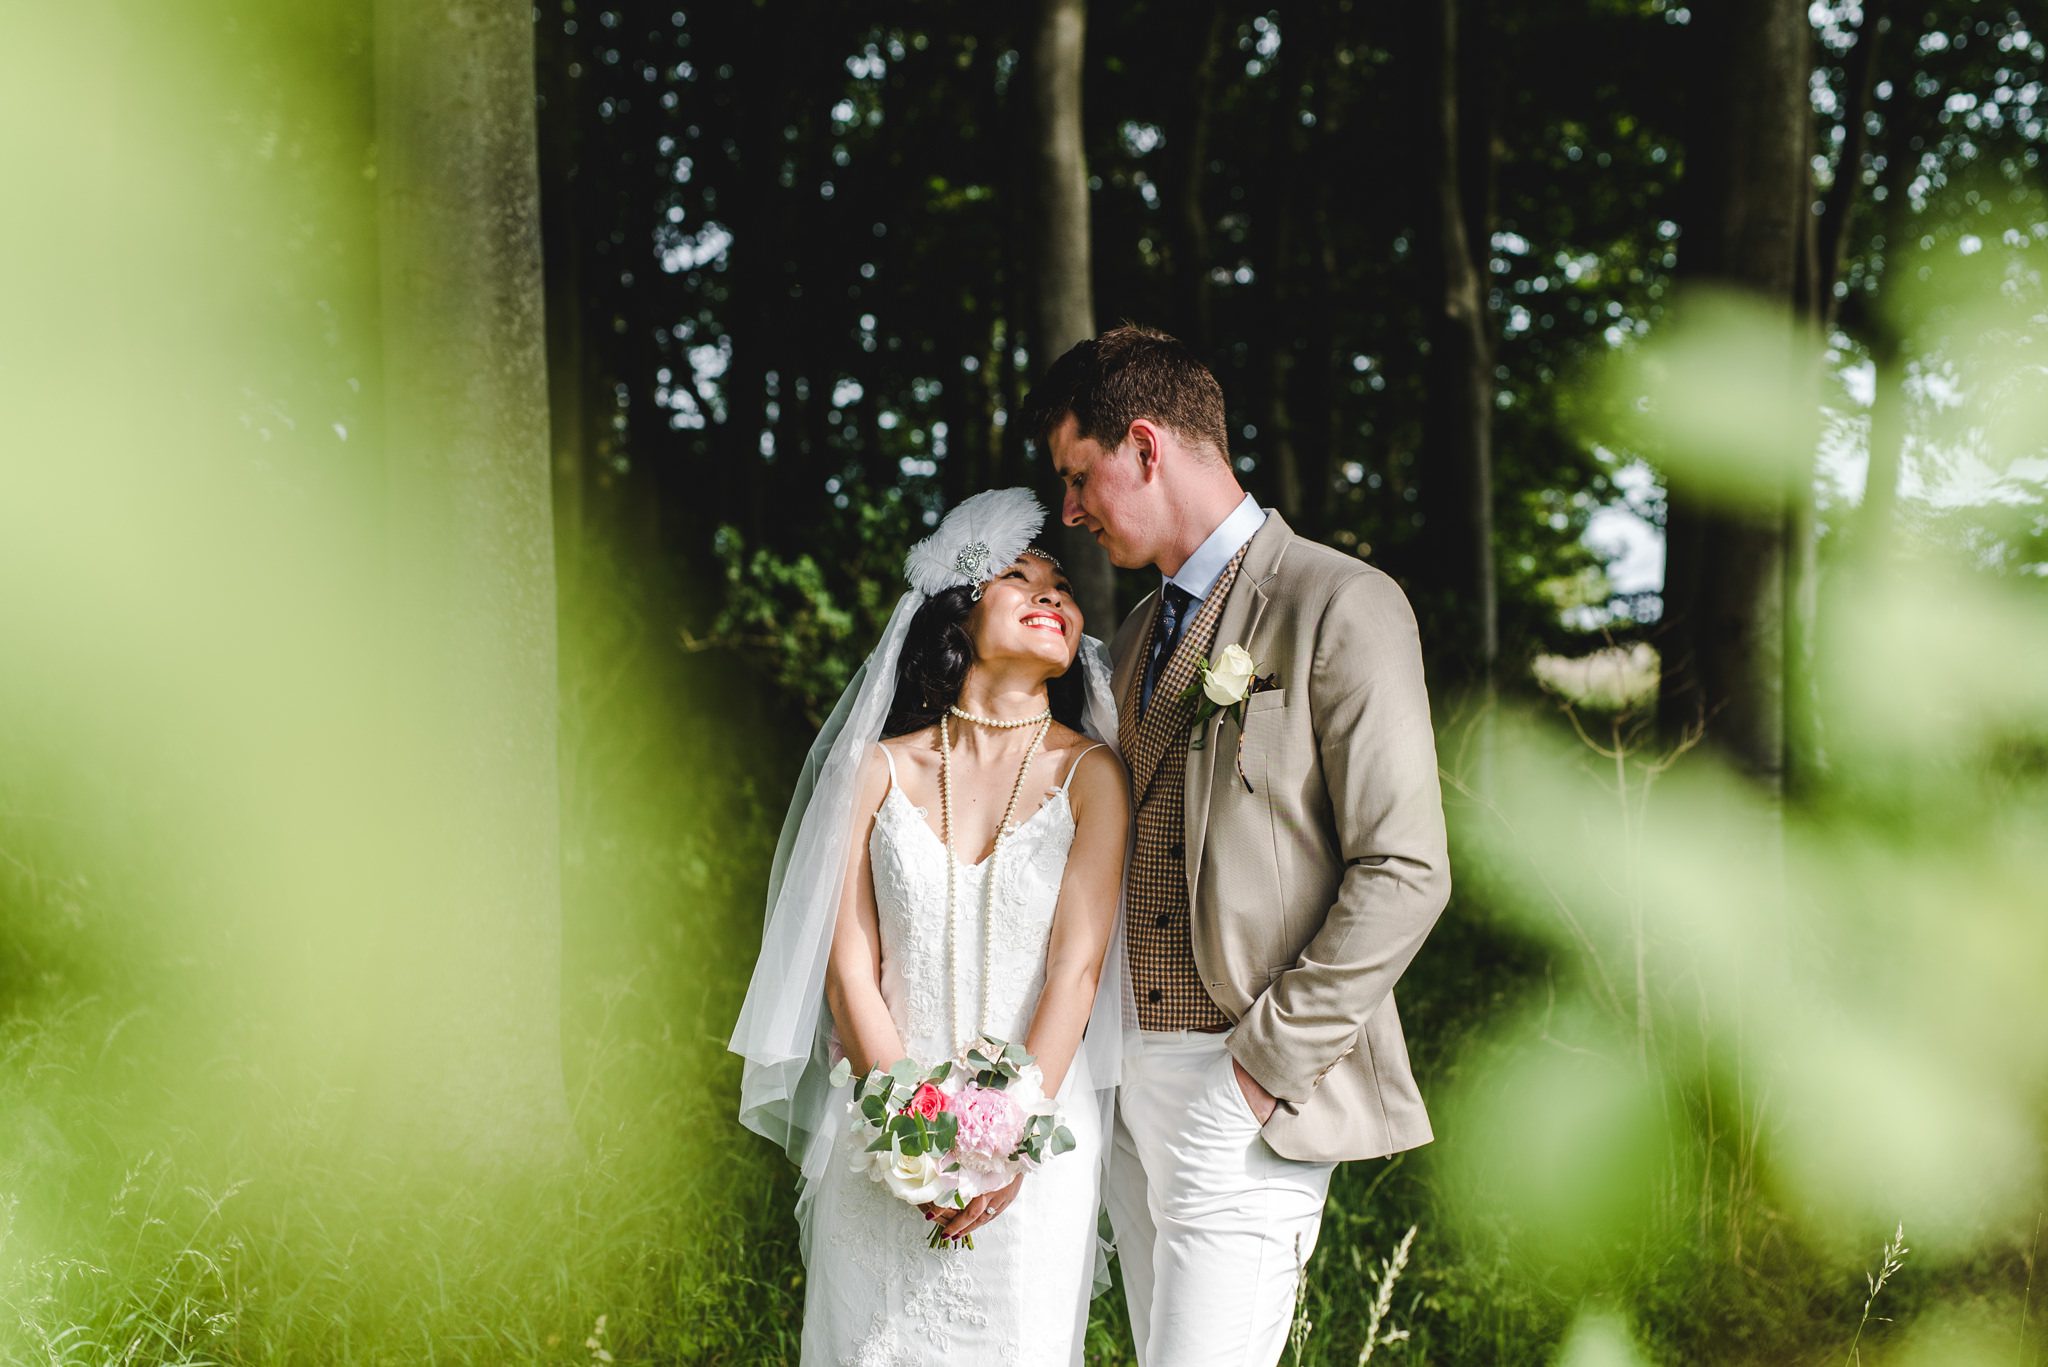 Mixed race bride and groom wedding in Gloucestershire